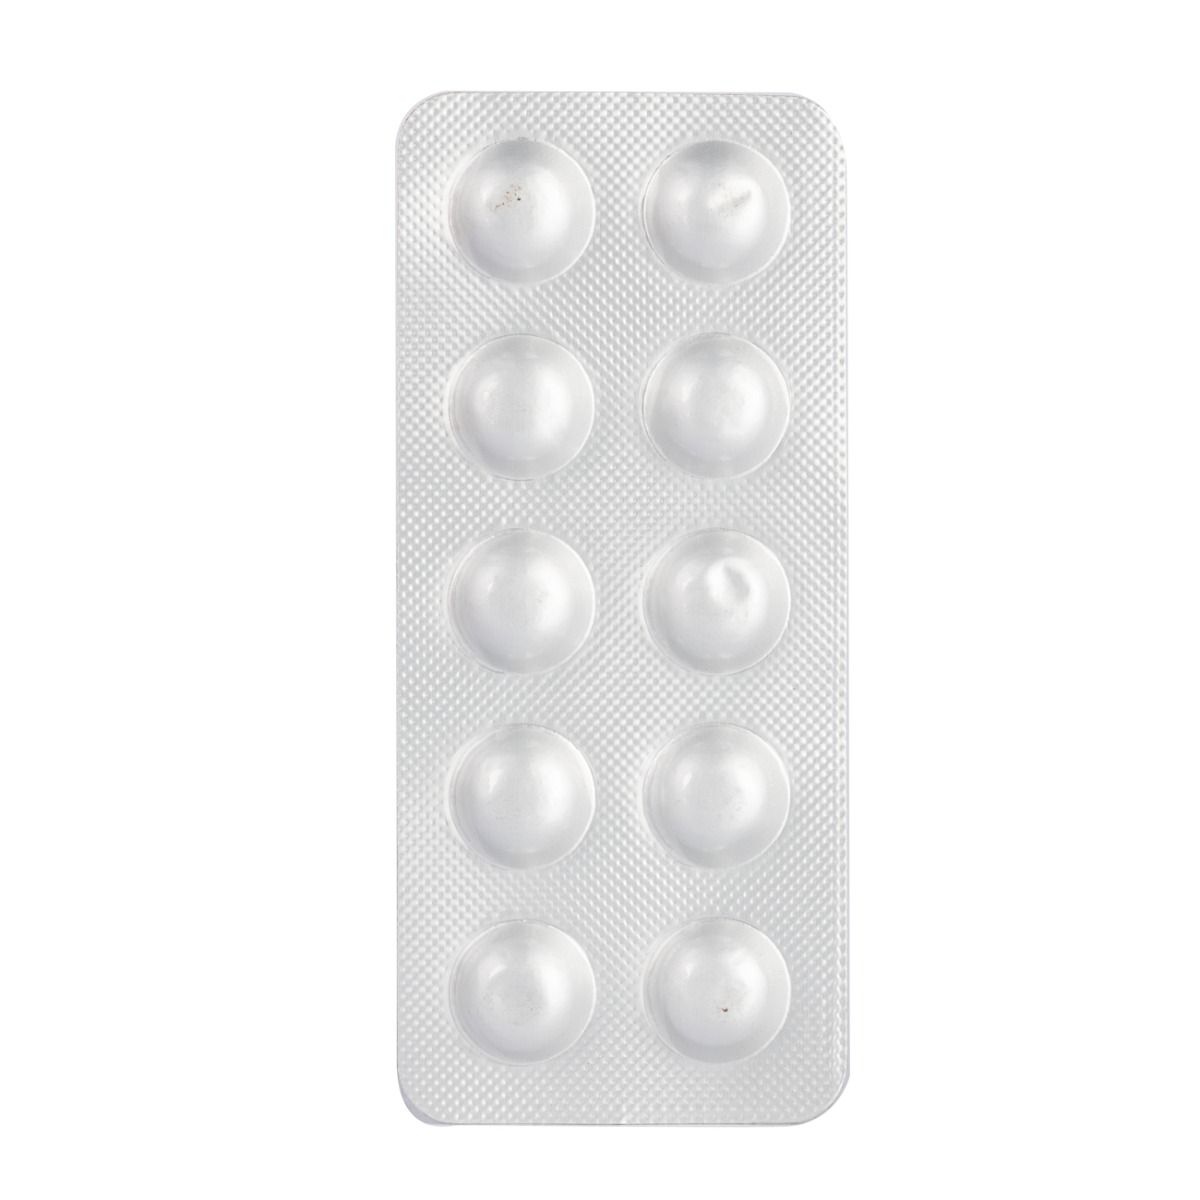 Homai LS Tablet 10's, Pack of 10 TABLETS